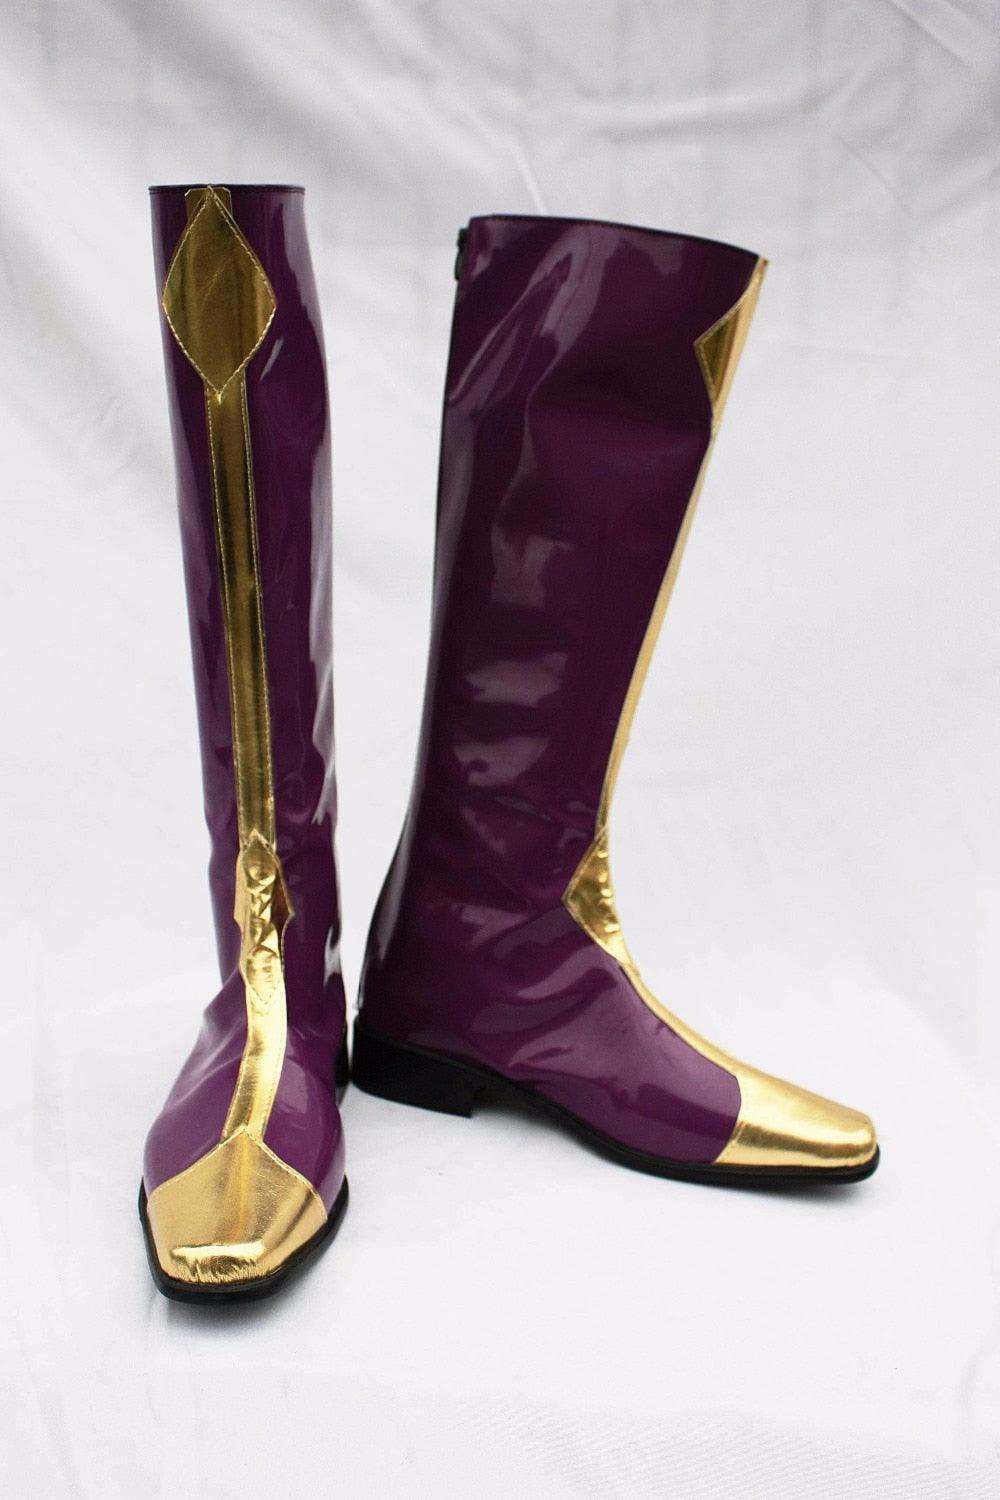 Code Geass Lelouch of the Rebellion Zero Custom Made Anime Cosplay Boots